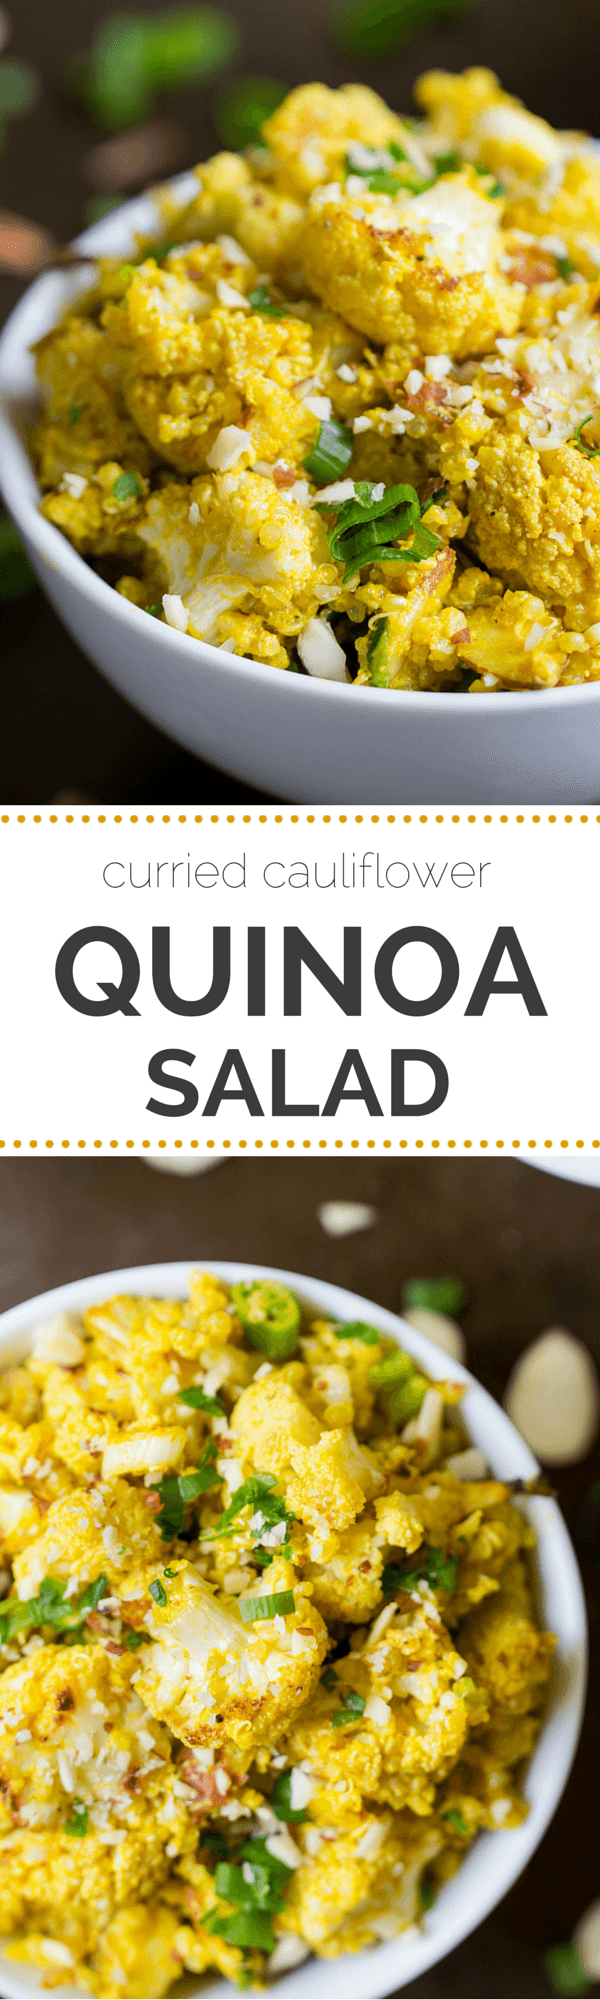 Curried Cauliflower Quinoa Salad -- a quick and healthy side dish with a dreamy tahini-curry dressing | recipe from simplyquinoa.com | gluten-free + vegan